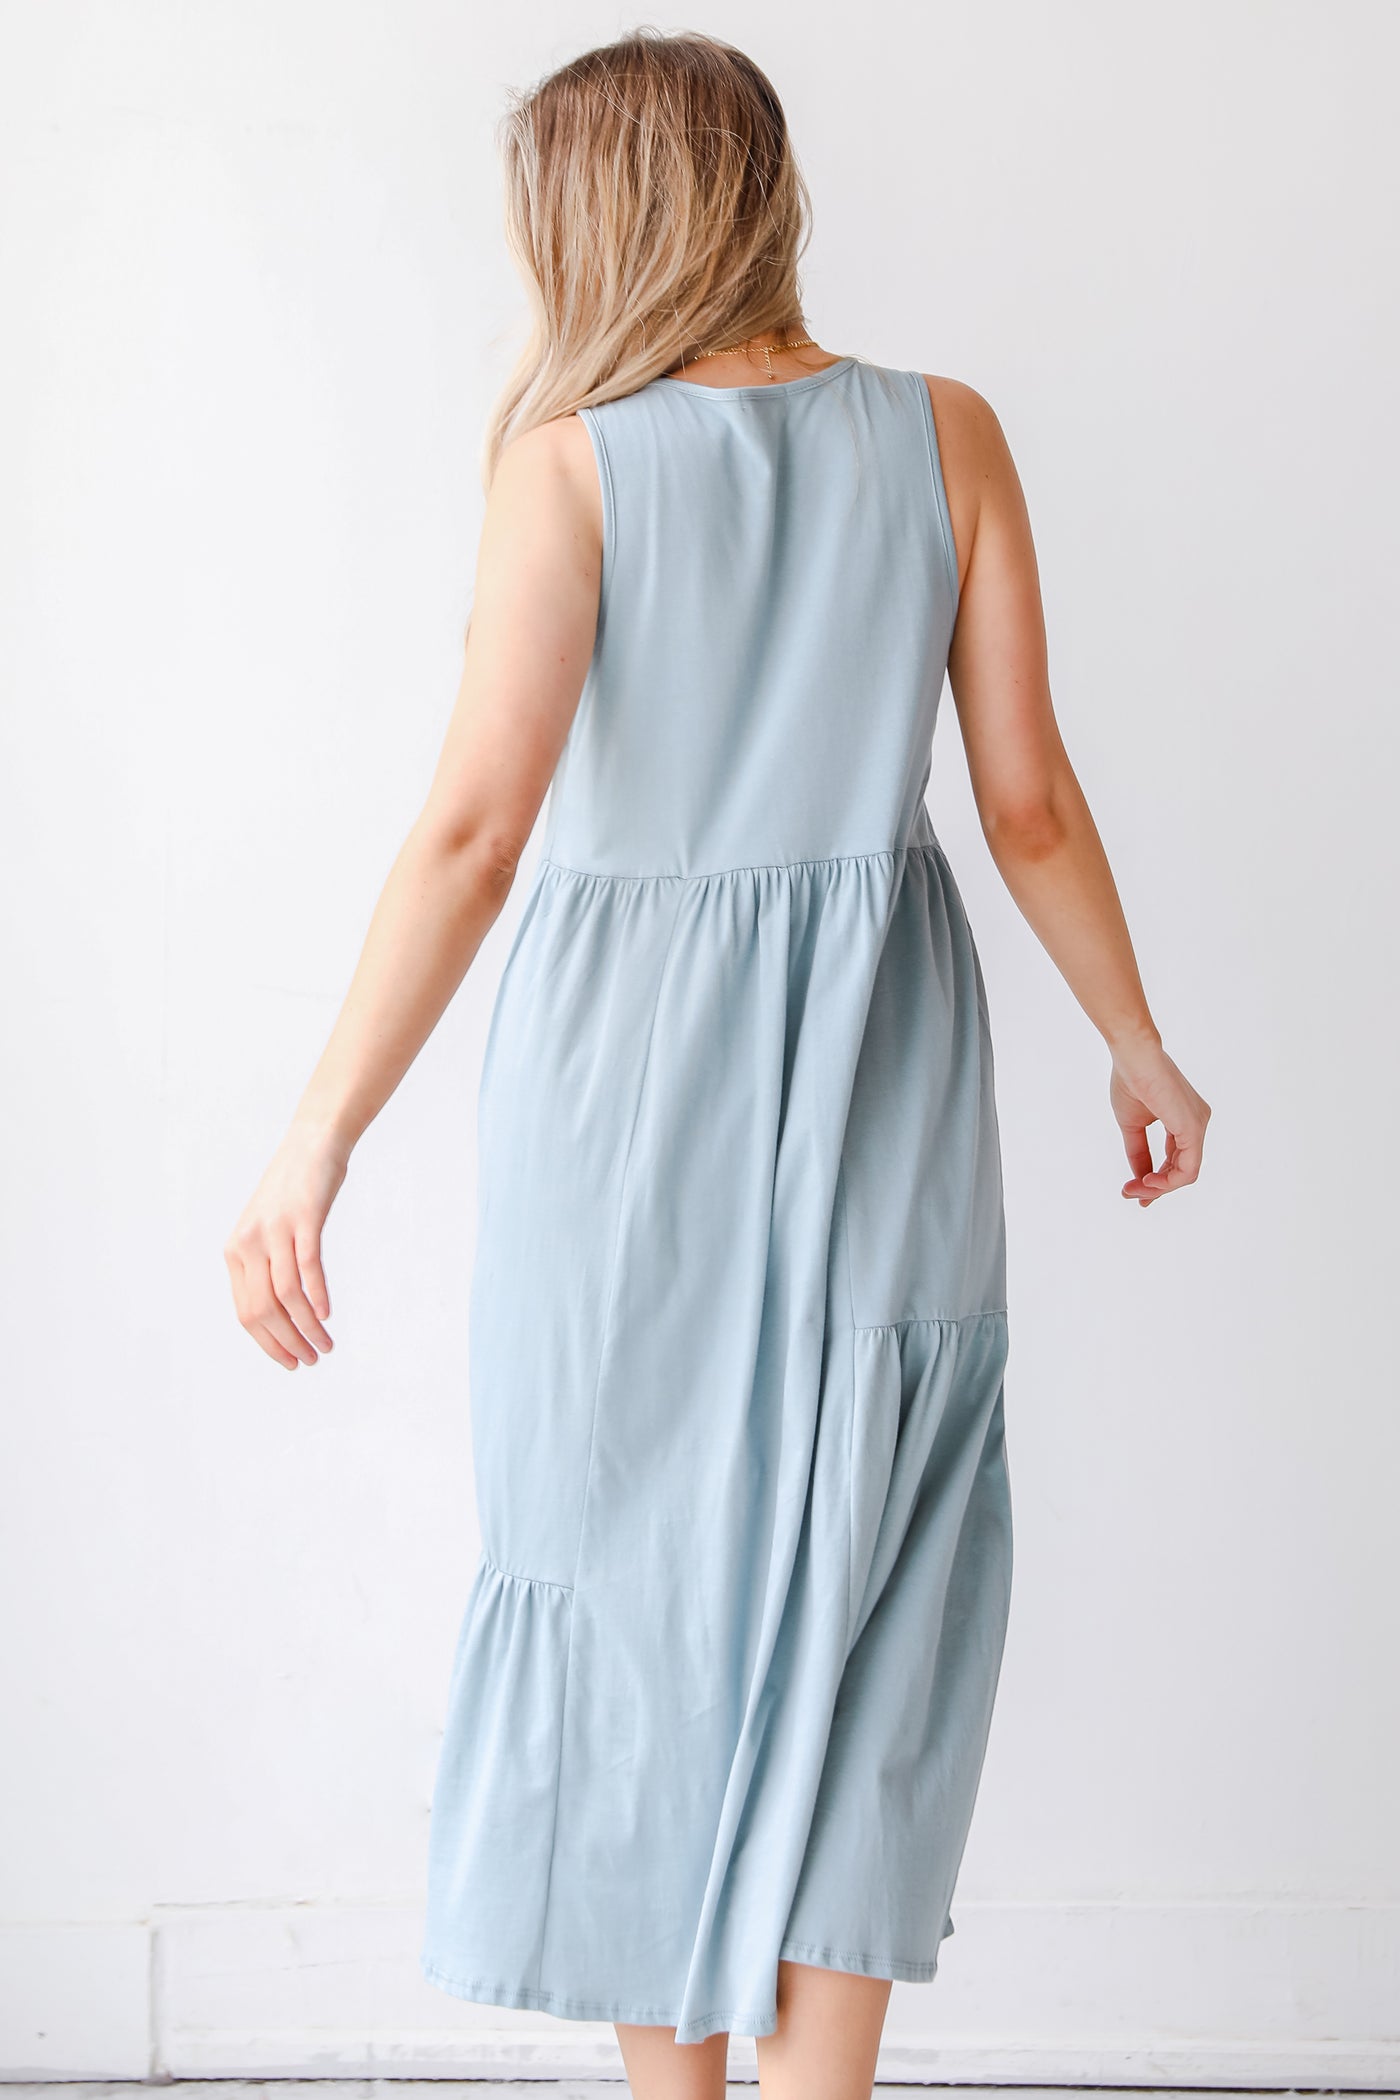 Tiered Maxi Dress in denim back view